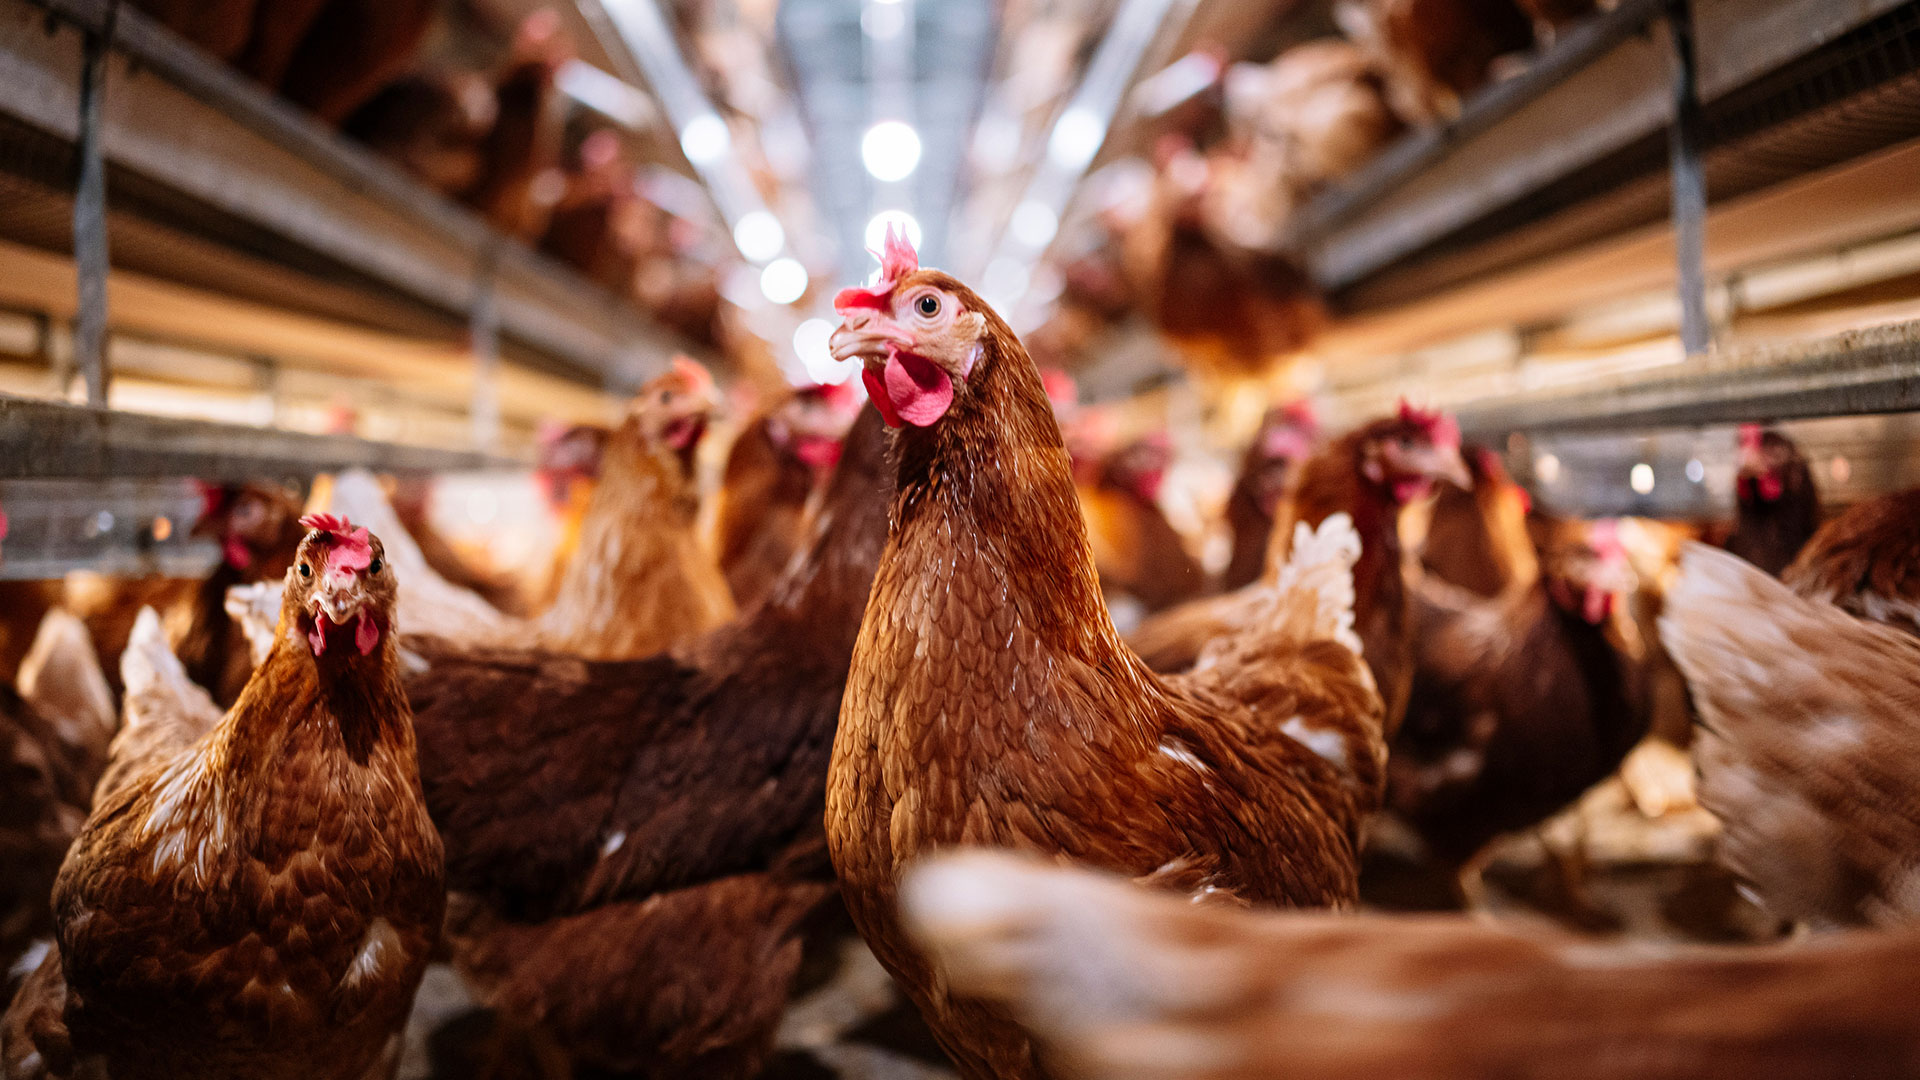 Indoor farm of hens that lay eggs. (Getty)